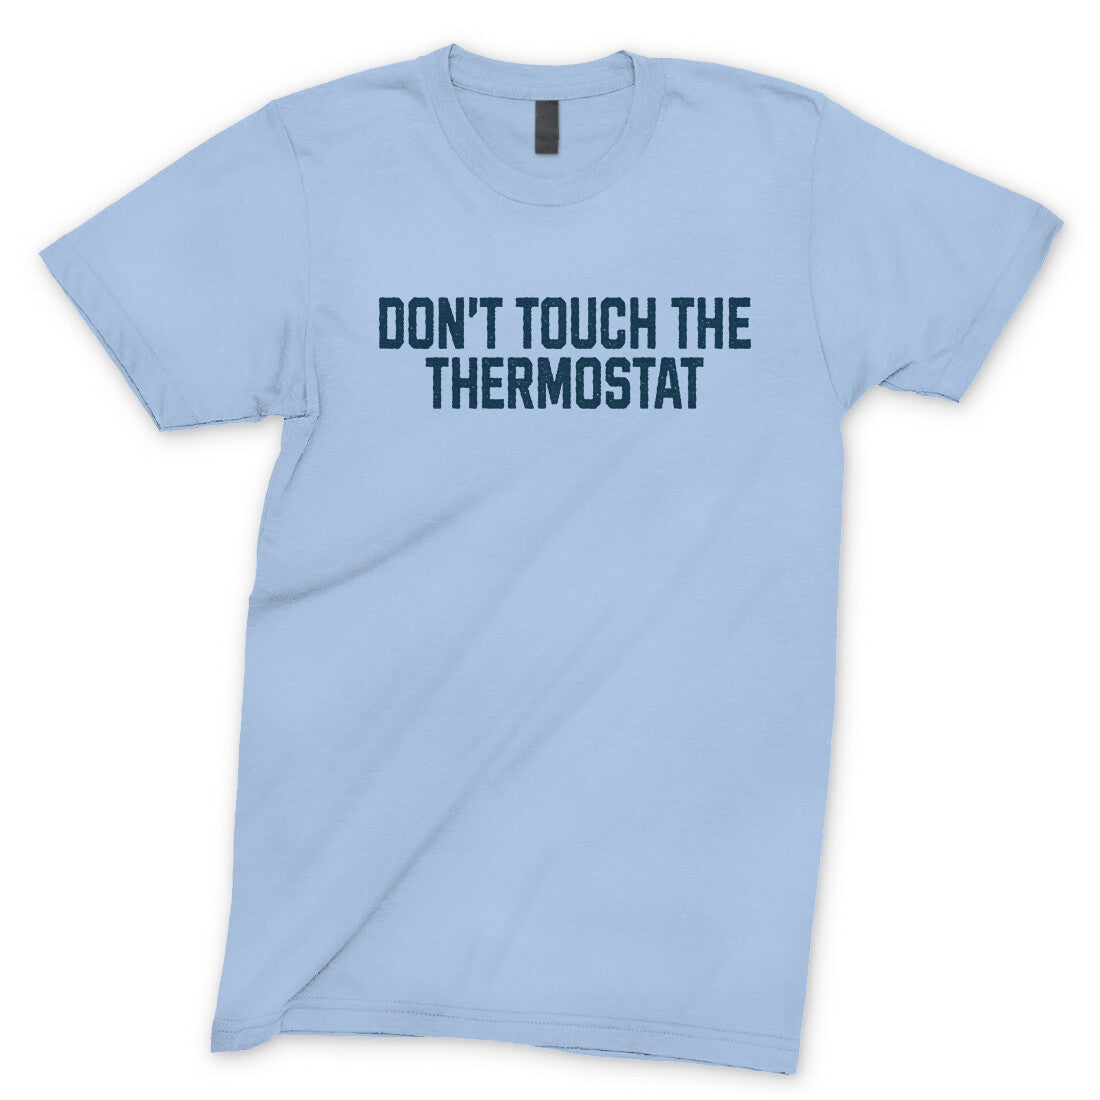 Don't Touch the Thermostat in Light Blue Color